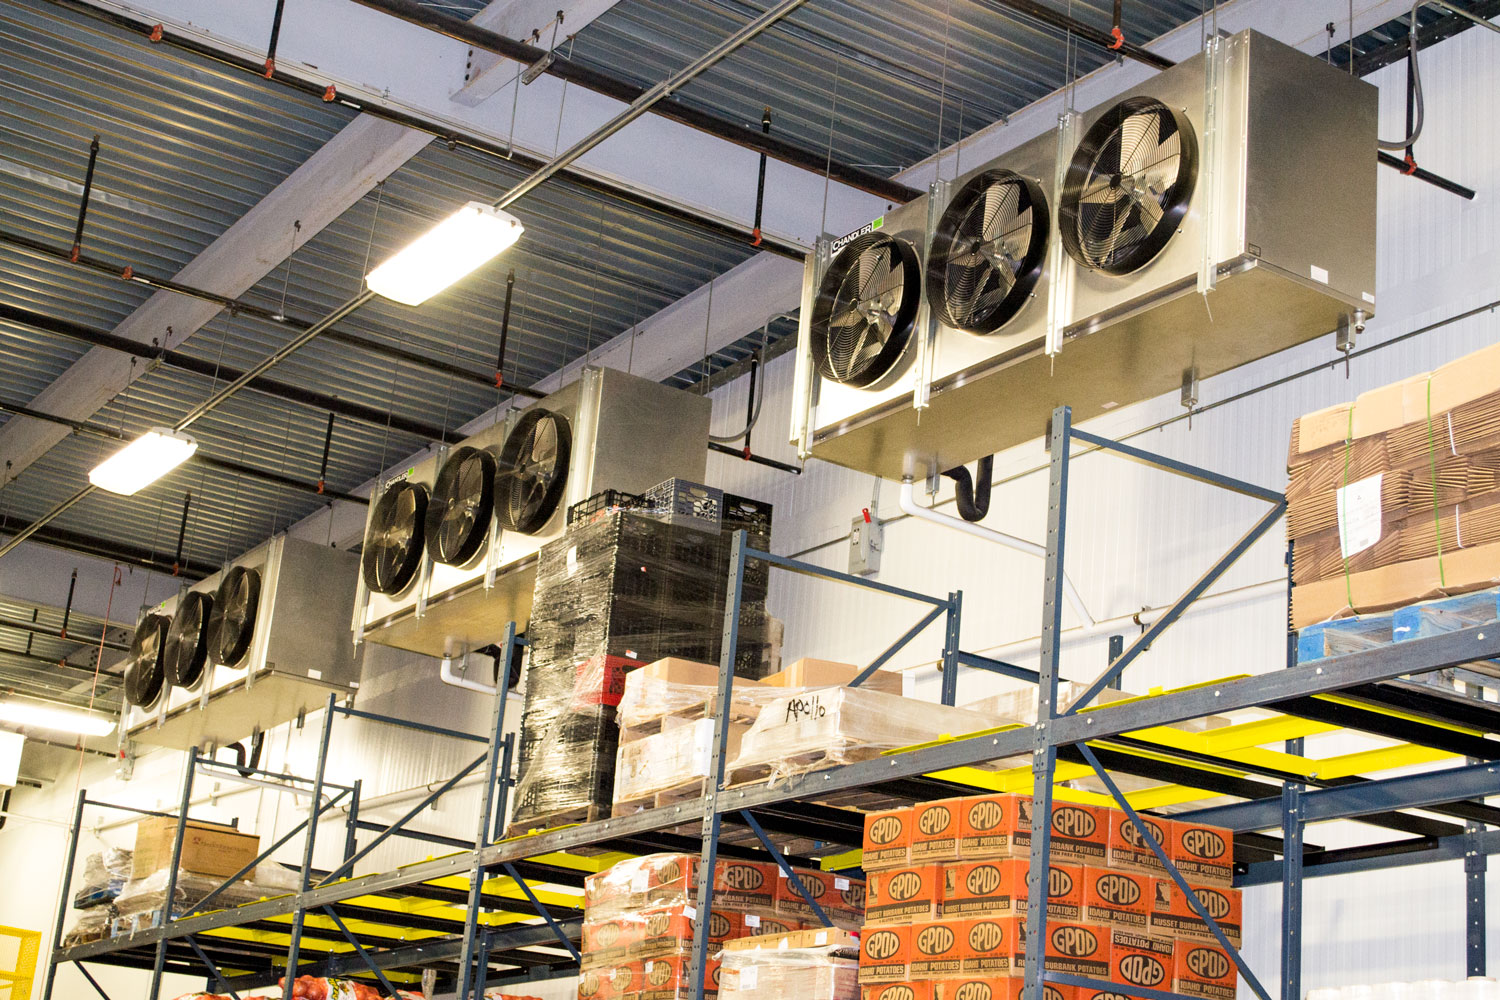 Fans in the warehouse NRM remote refrigeration controls